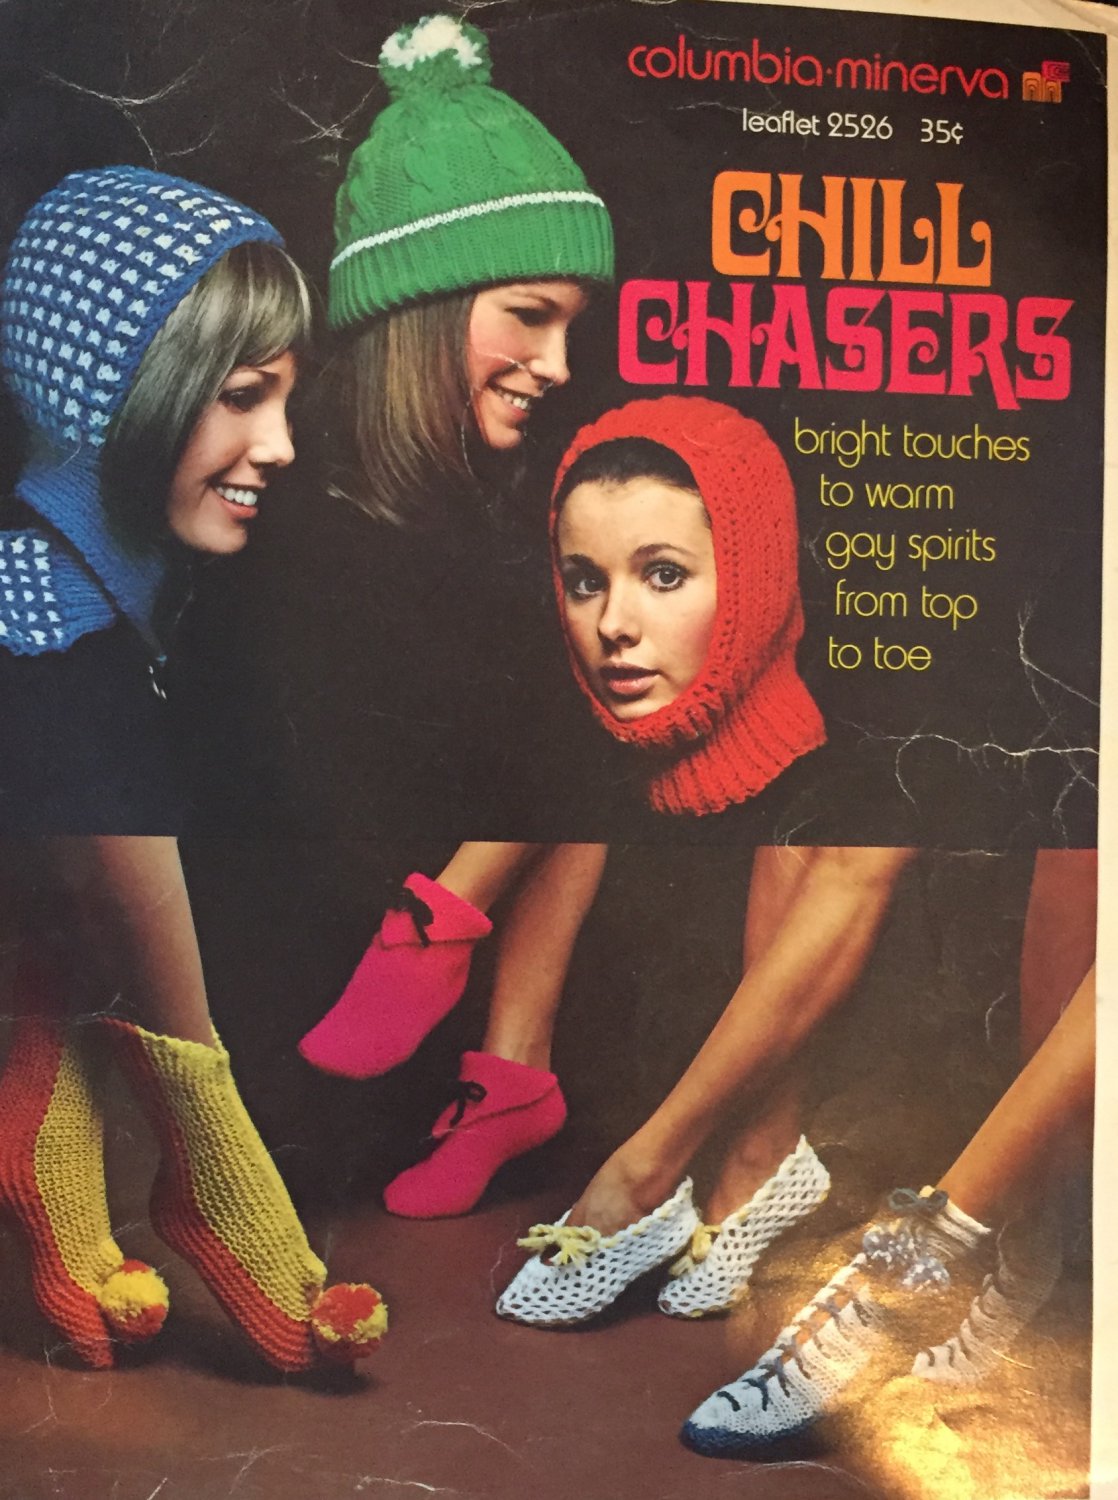 Chill Chasers hats scarves mittens slippers Columbia Minerva 2526 1970's Knitting & crochet patterns